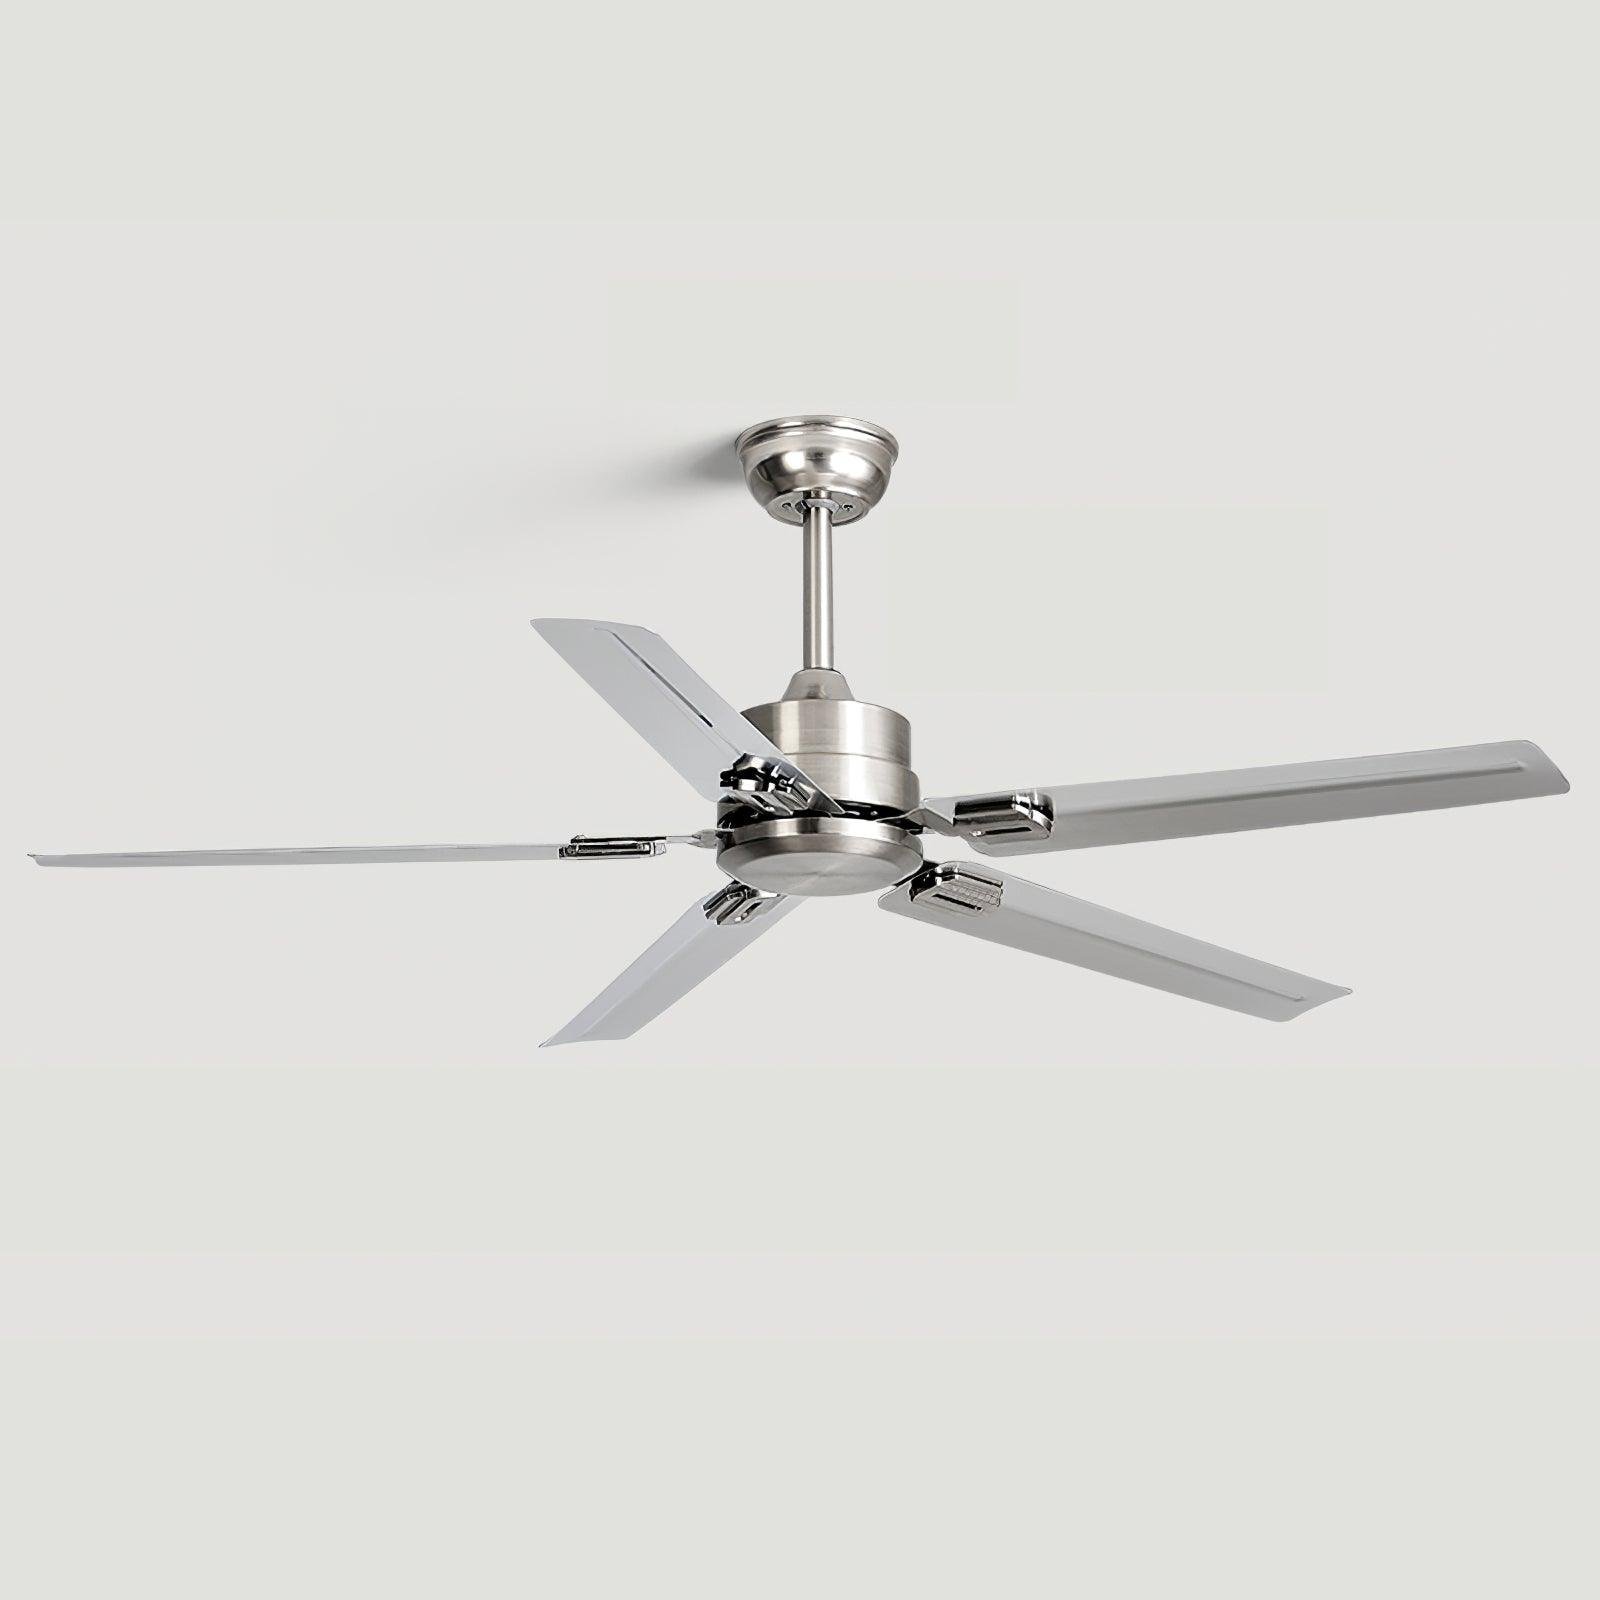 Ceiling Fan in Stainless Steel with Remote Control, 52 inch Diameter x 11.8 inch Height (132cm x 30cm)